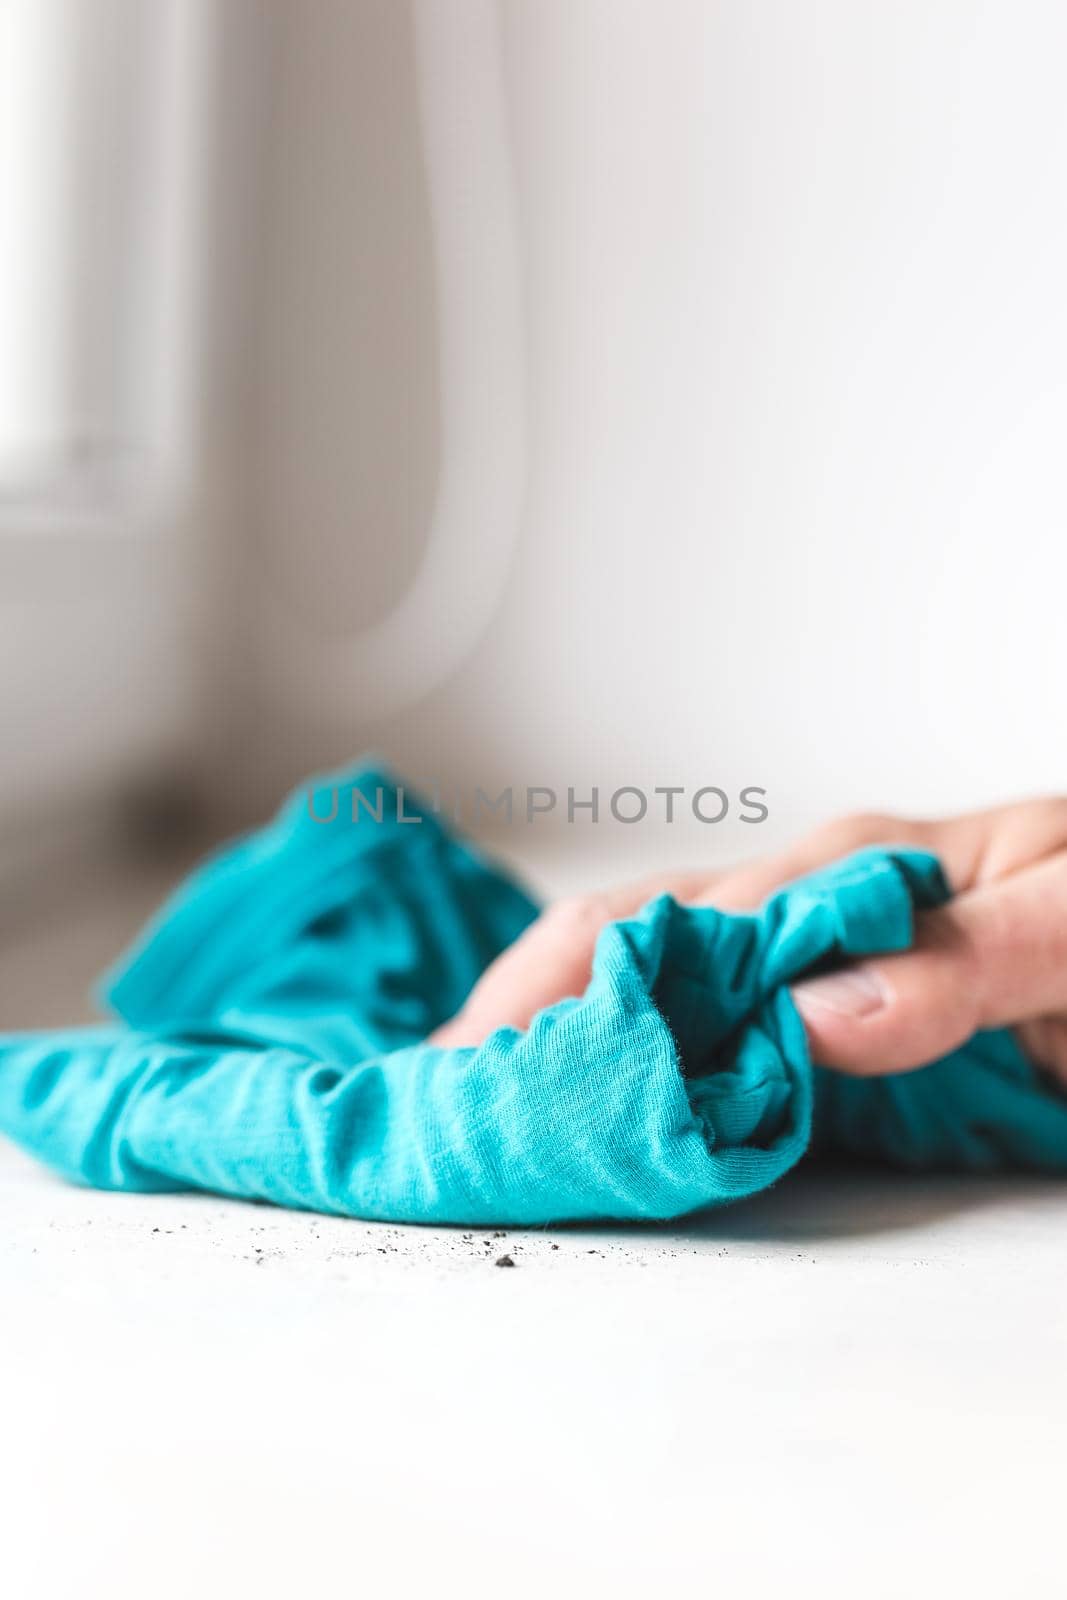 Man cleaning the windowsill with a blue cloth. Doing chores at home